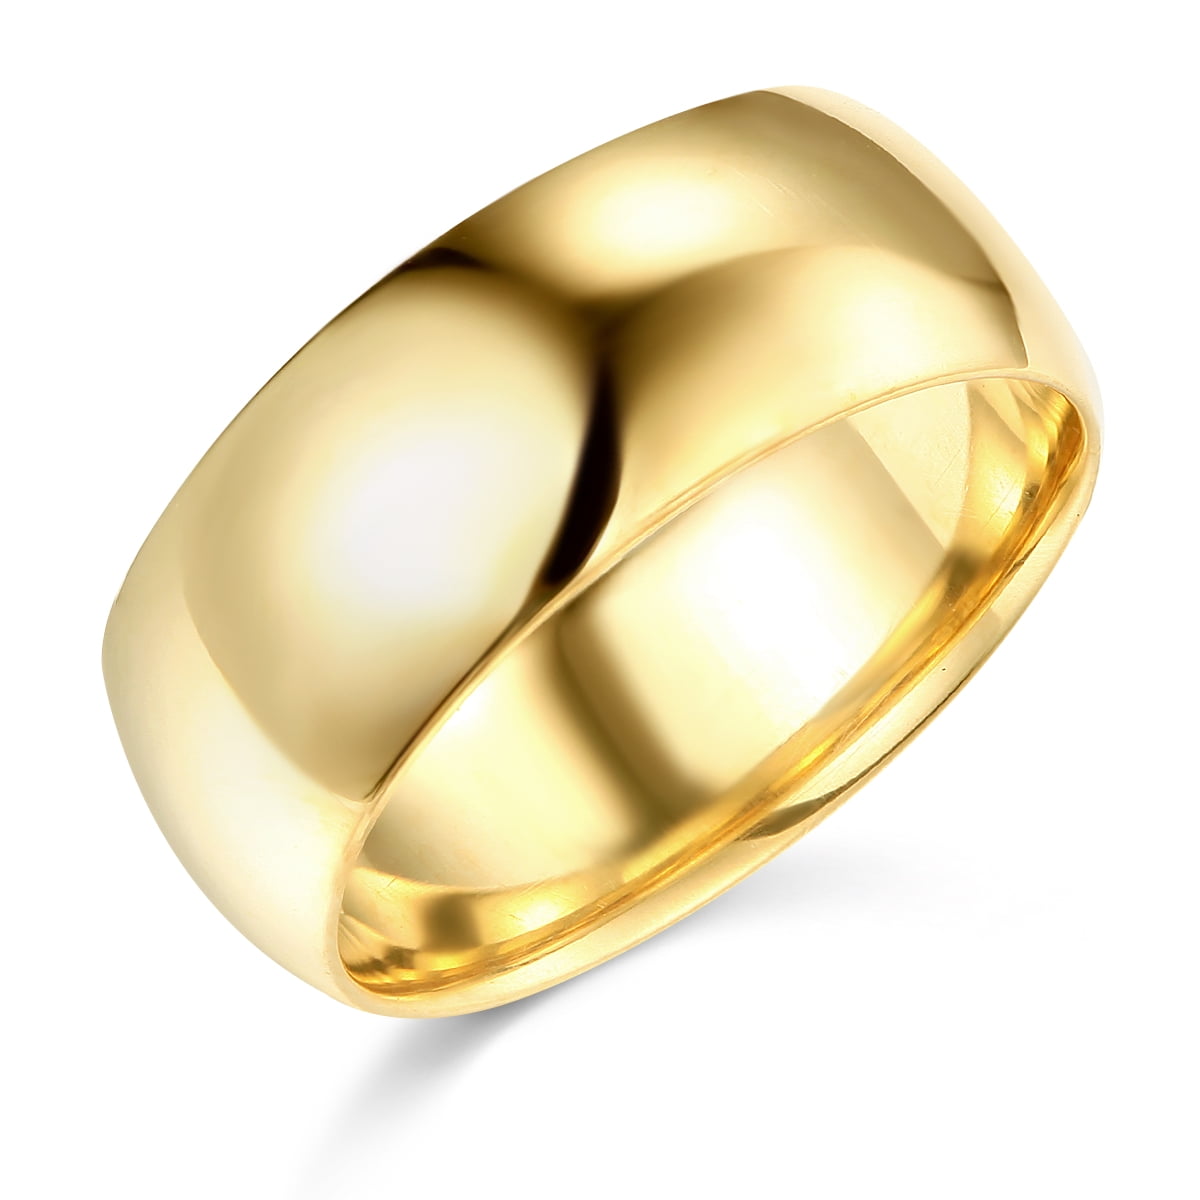 Wellingsale Mens 14k Yellow Gold Solid 8mm COMFORT FIT Traditional Wedding Band Ring - Size 5